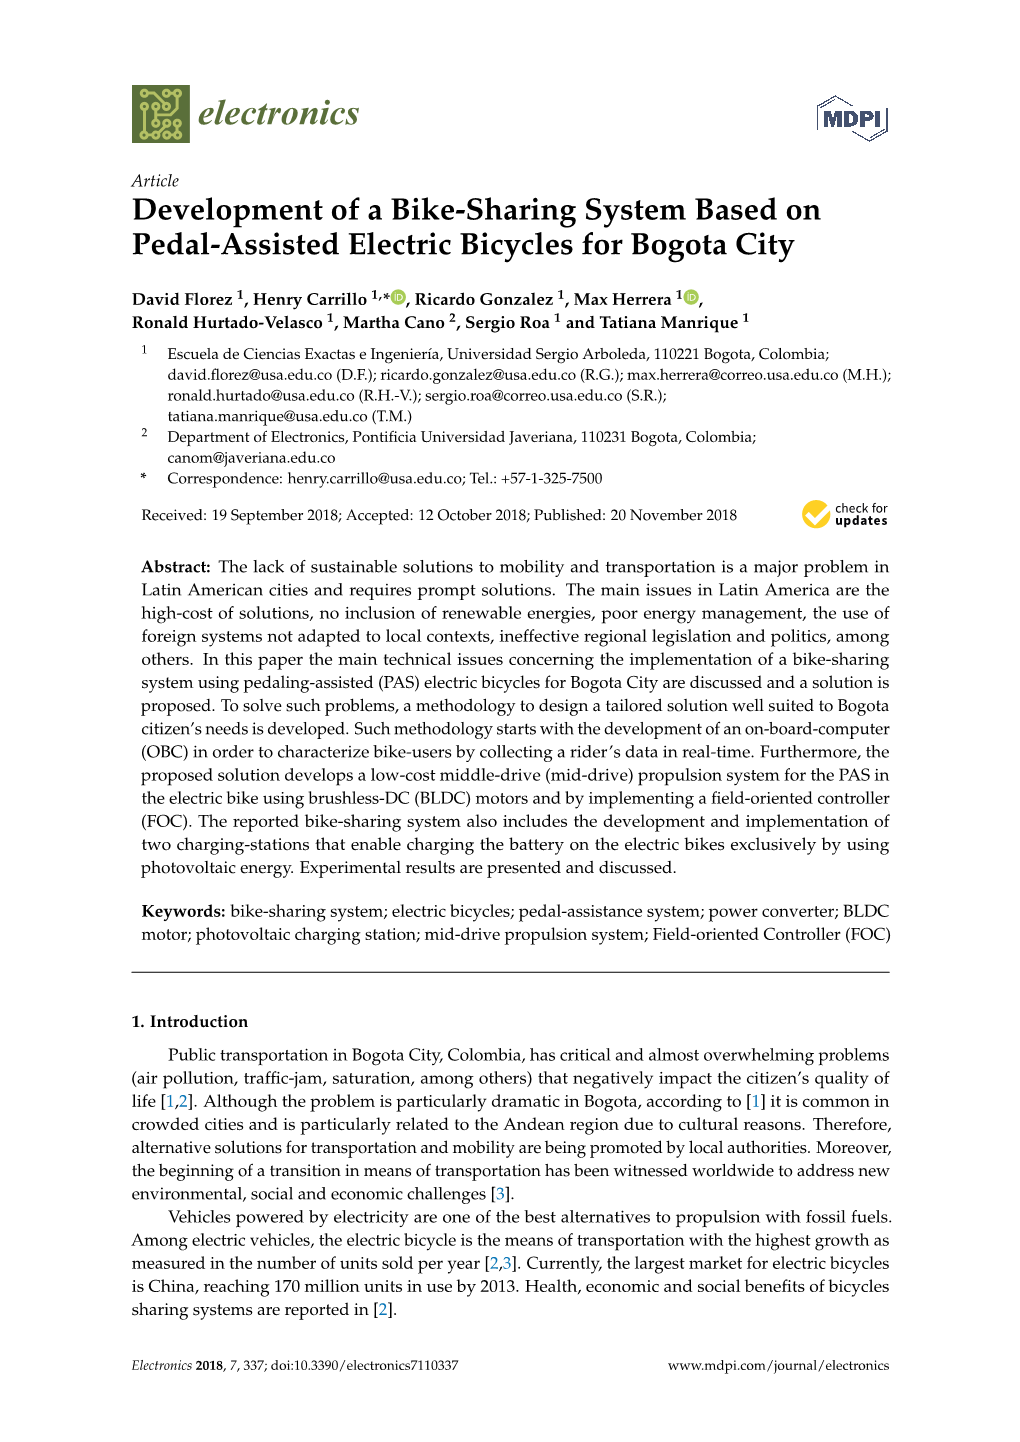 Development of a Bike-Sharing System Based on Pedal-Assisted Electric Bicycles for Bogota City